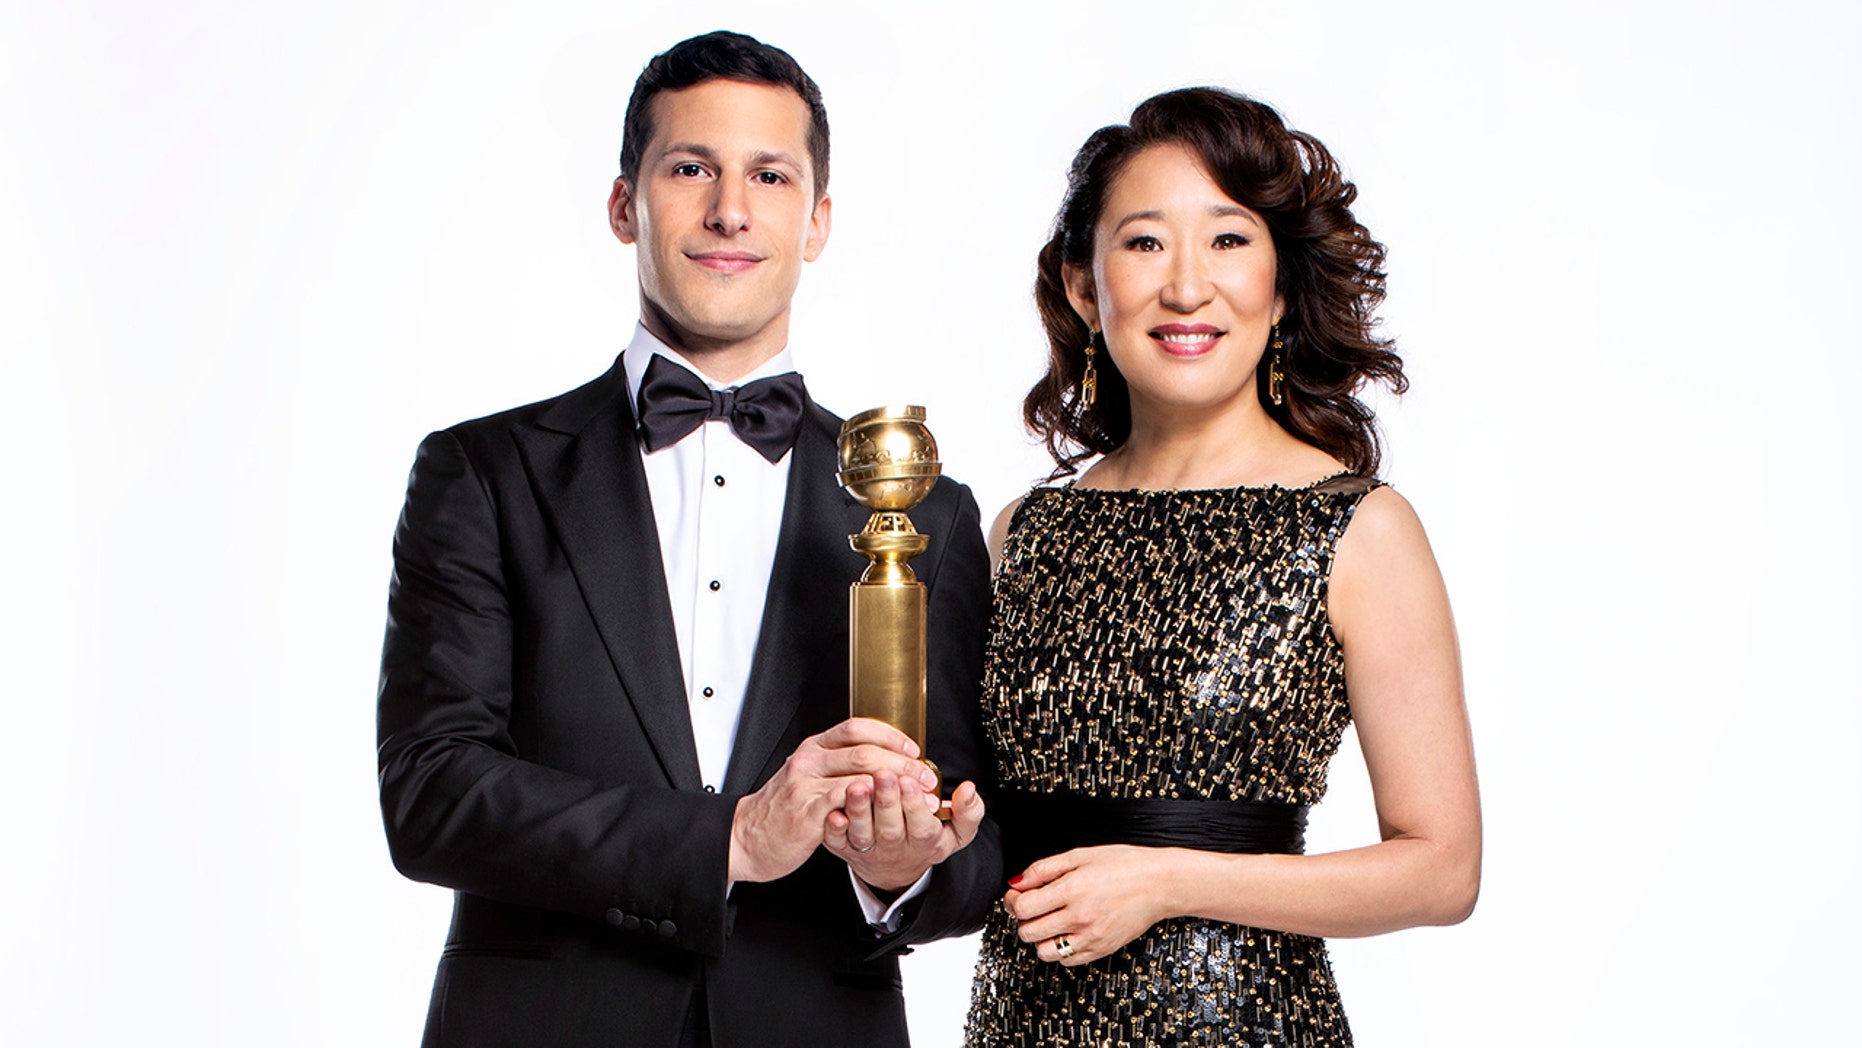 Golden Globes 2019 hosts Andy Samberg and Sandra Oh reveal how much political humor will be in the show